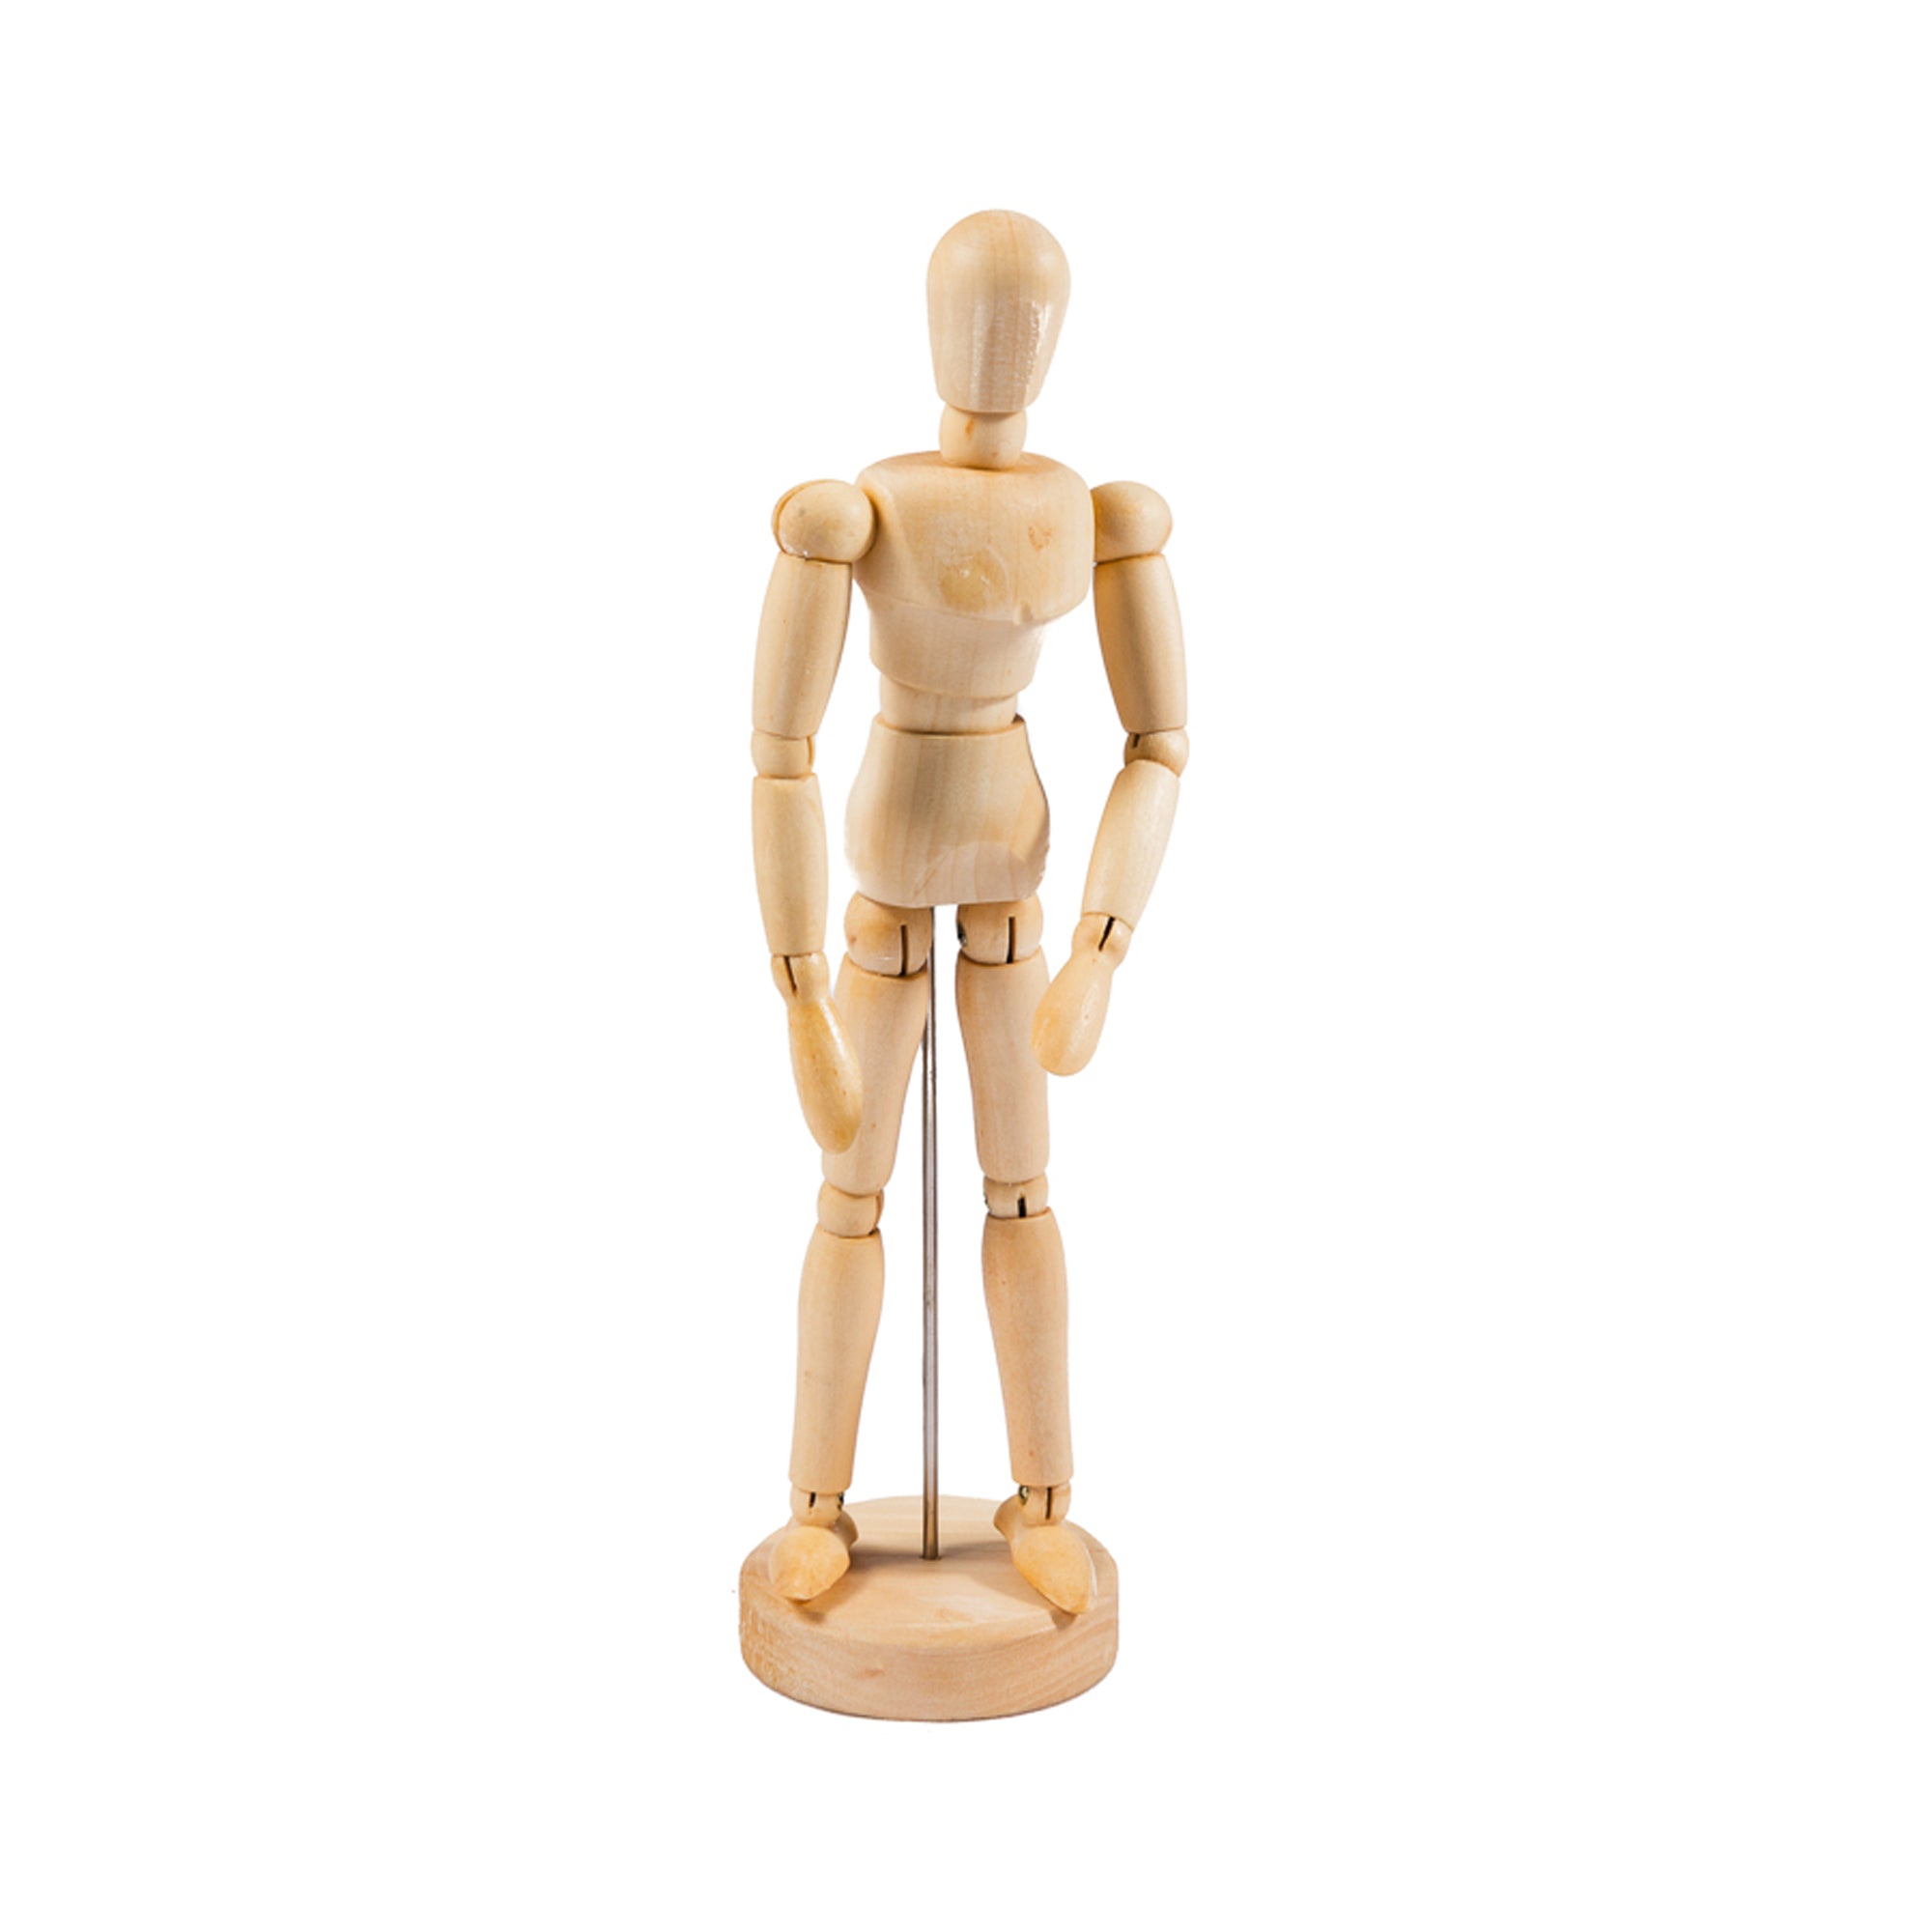 8 Inches Tall Wooden Artist Male Manikin with Stand